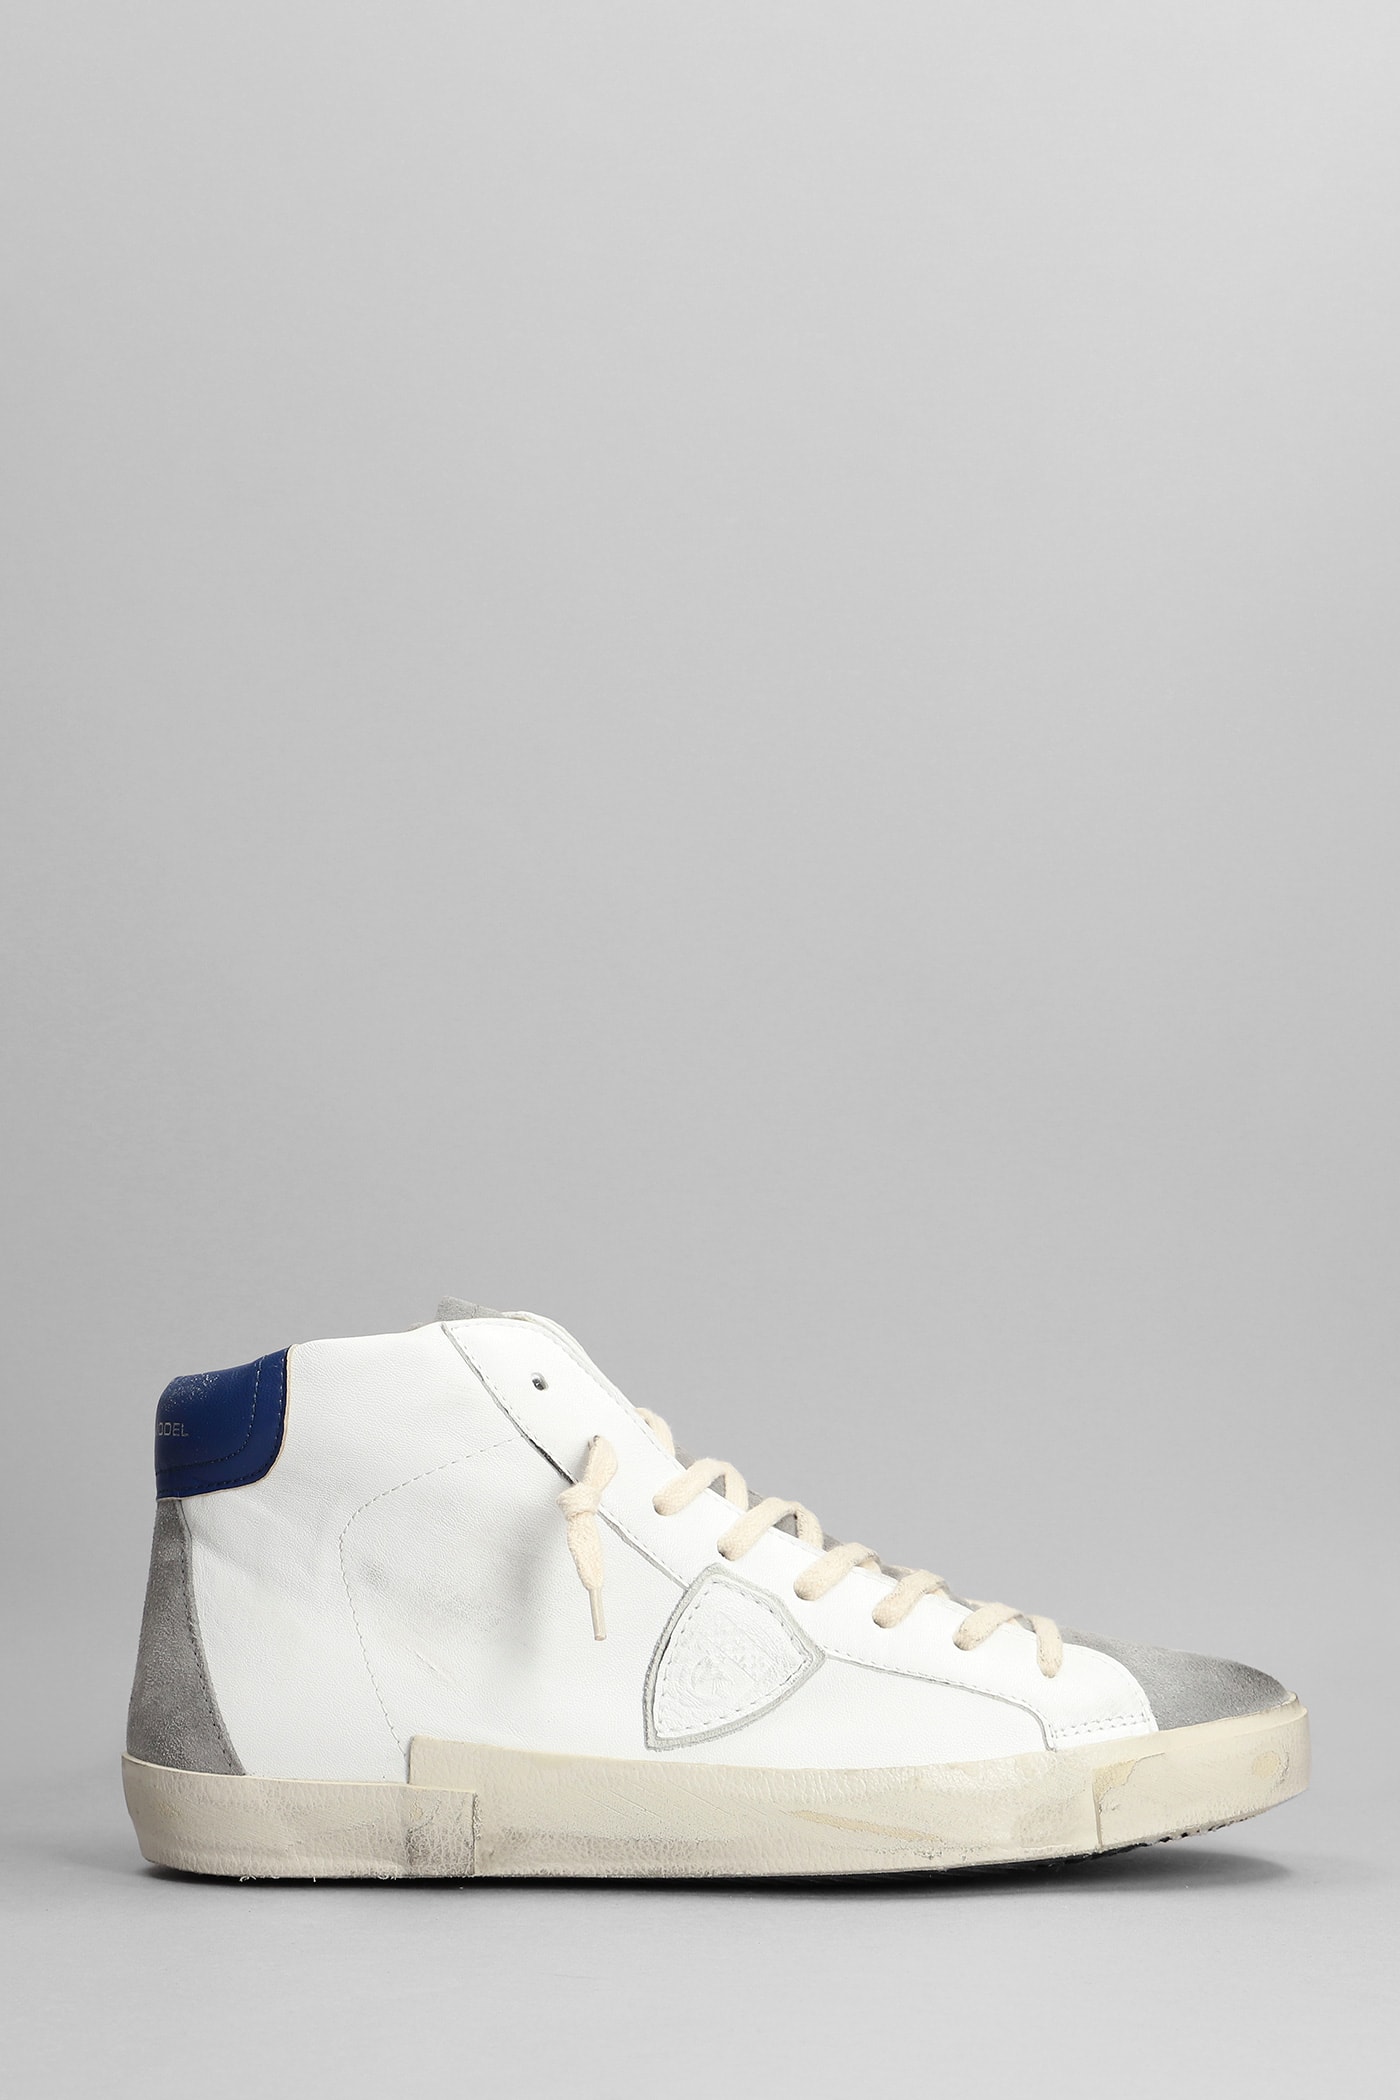 Philippe Model Prsx High Sneakers In White Suede And Leather